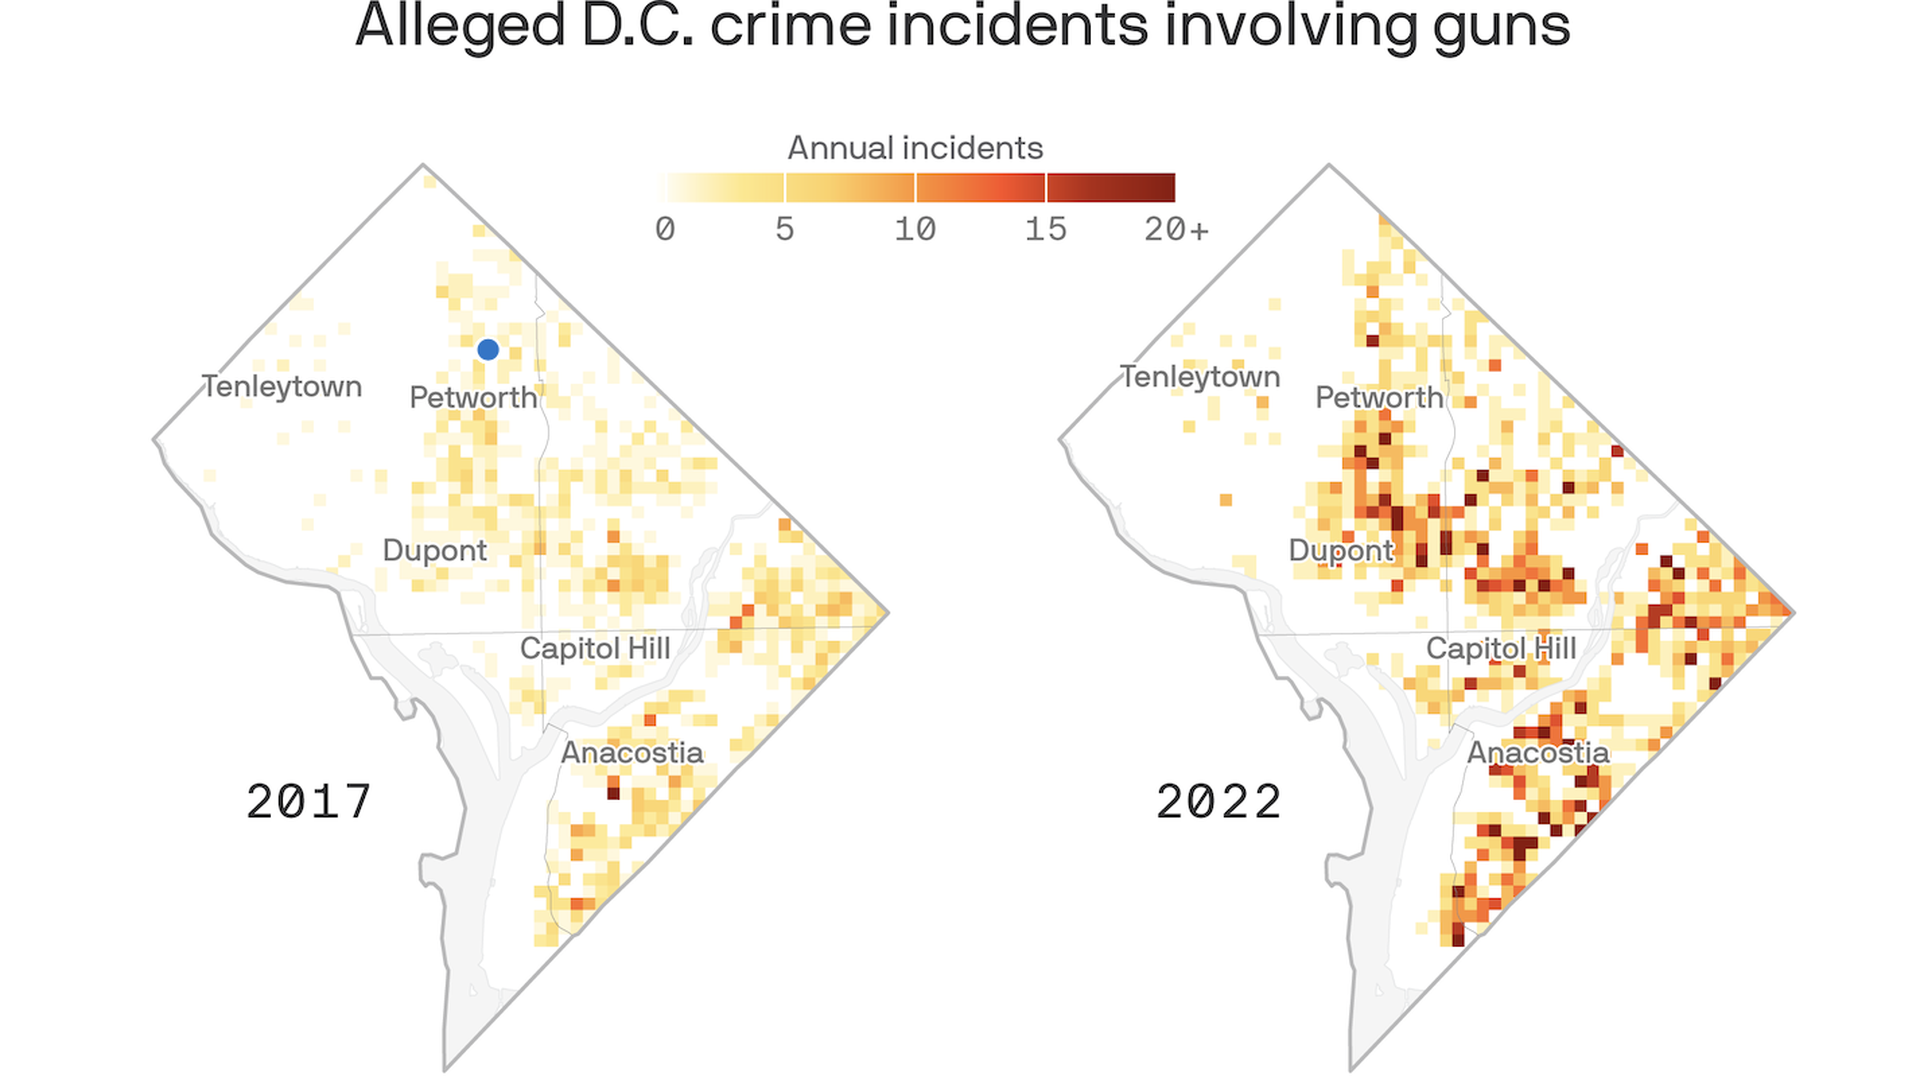 Two maps showing the locations of alleged gun violence crimes in D.C. in 2017 and 2022.